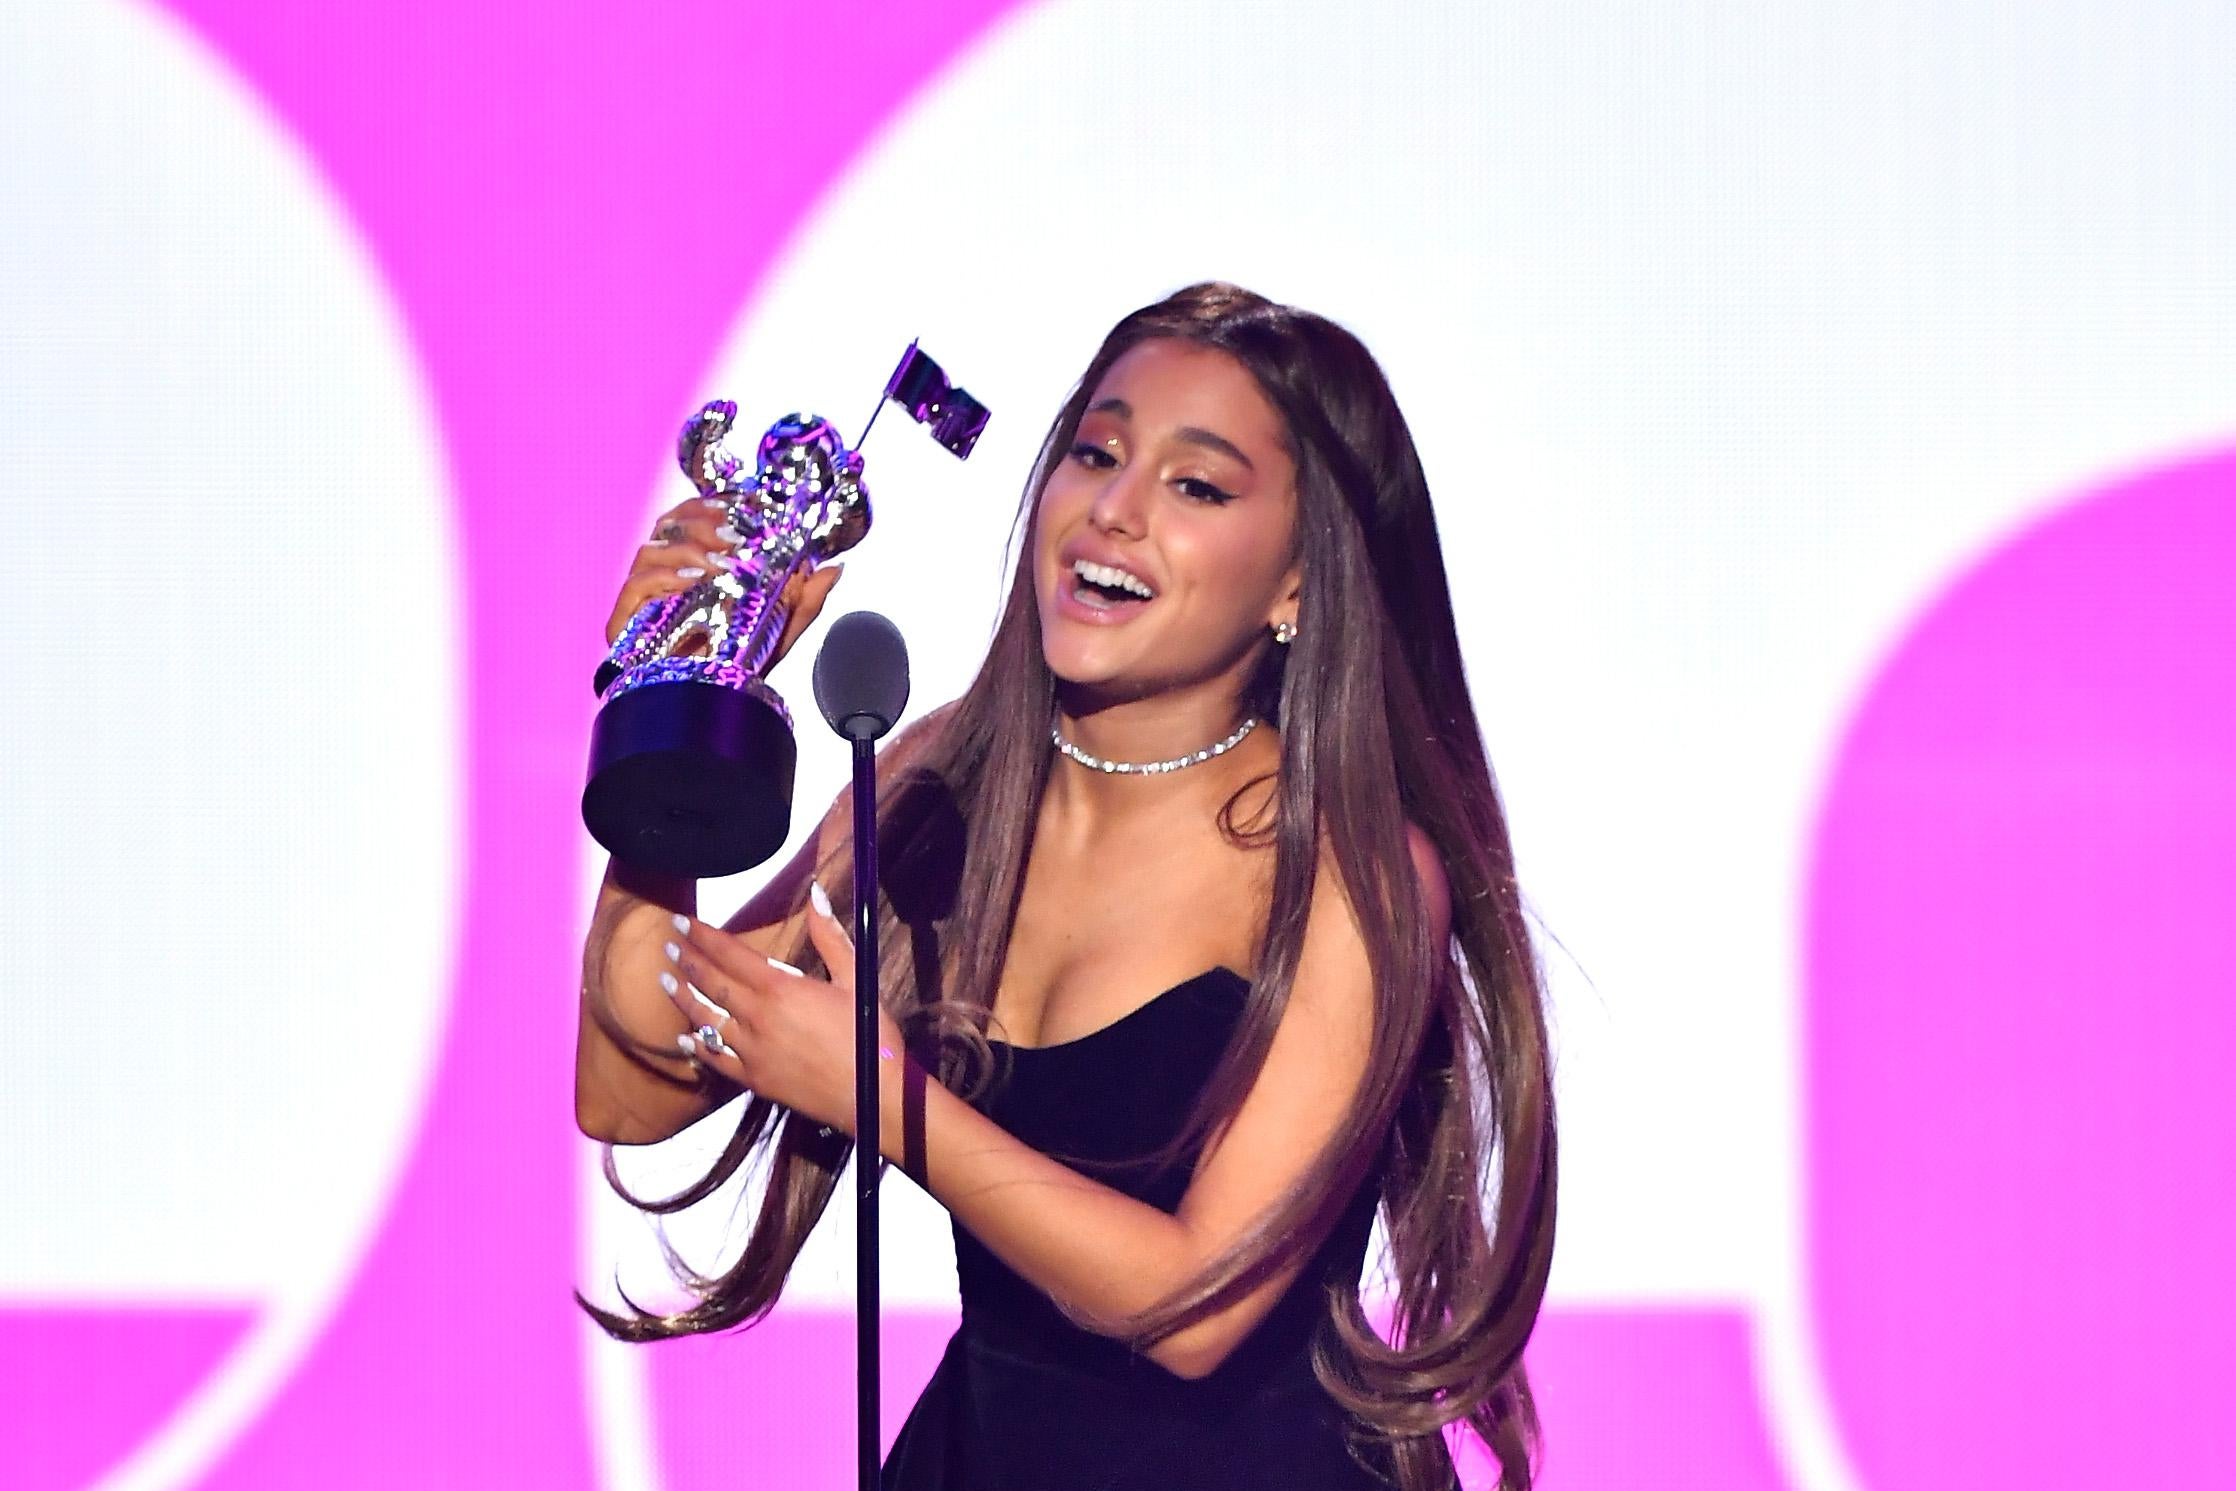 Ariana Grande holds a statuette up as she speaks into a microphone.